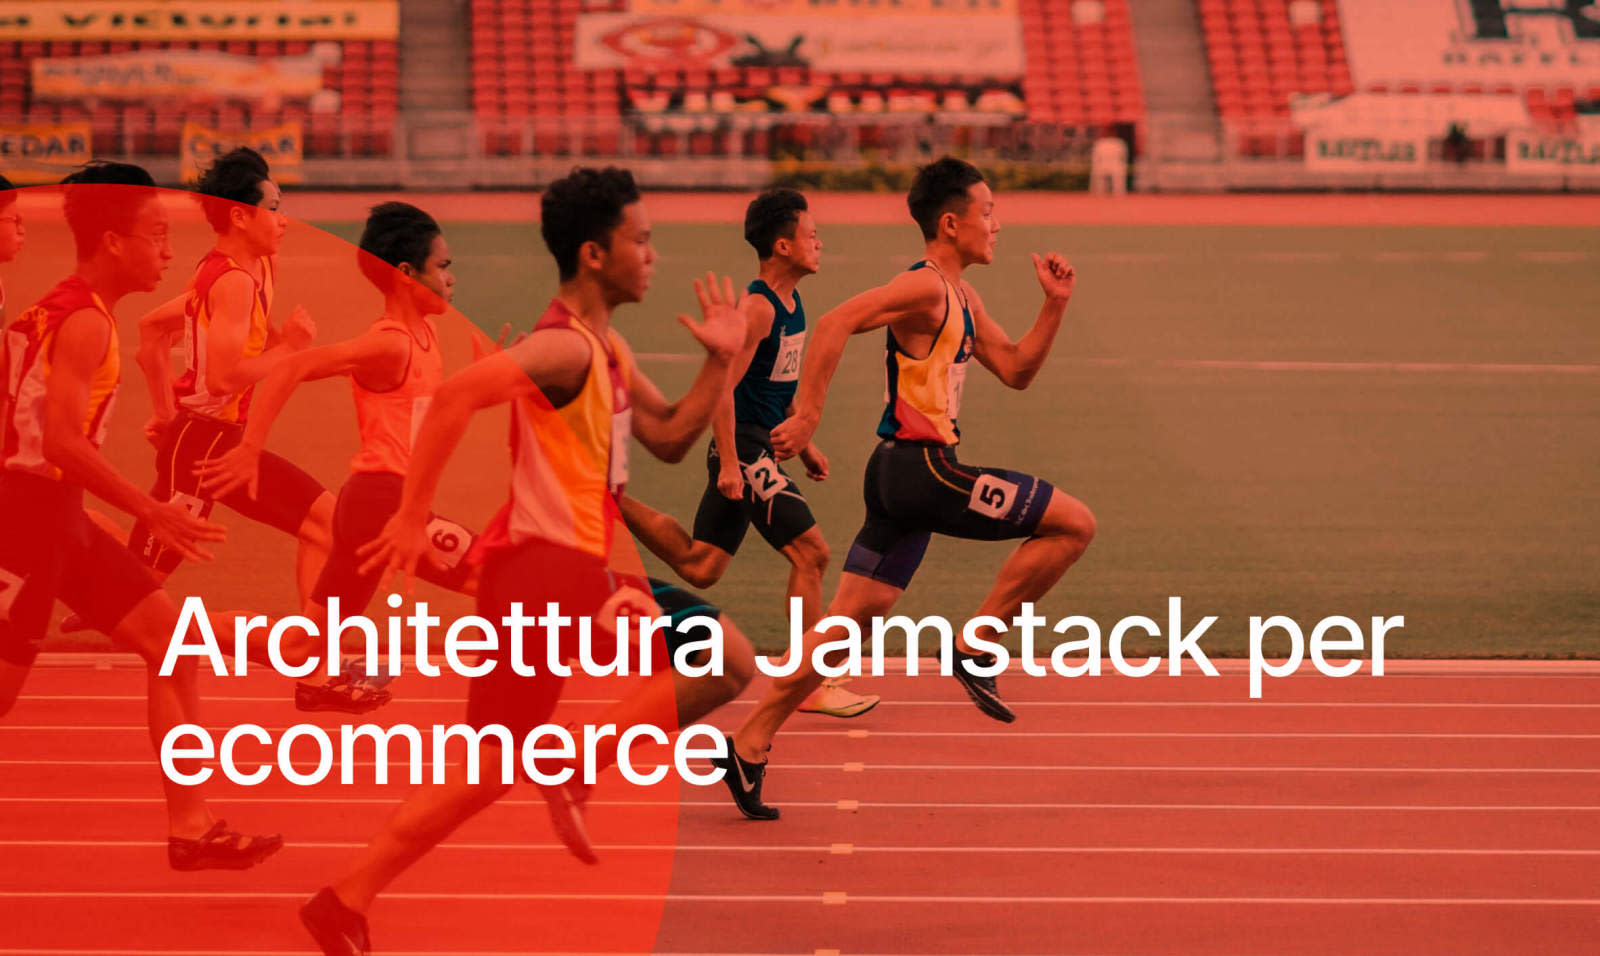 Jamstack Architecture for ecommerce